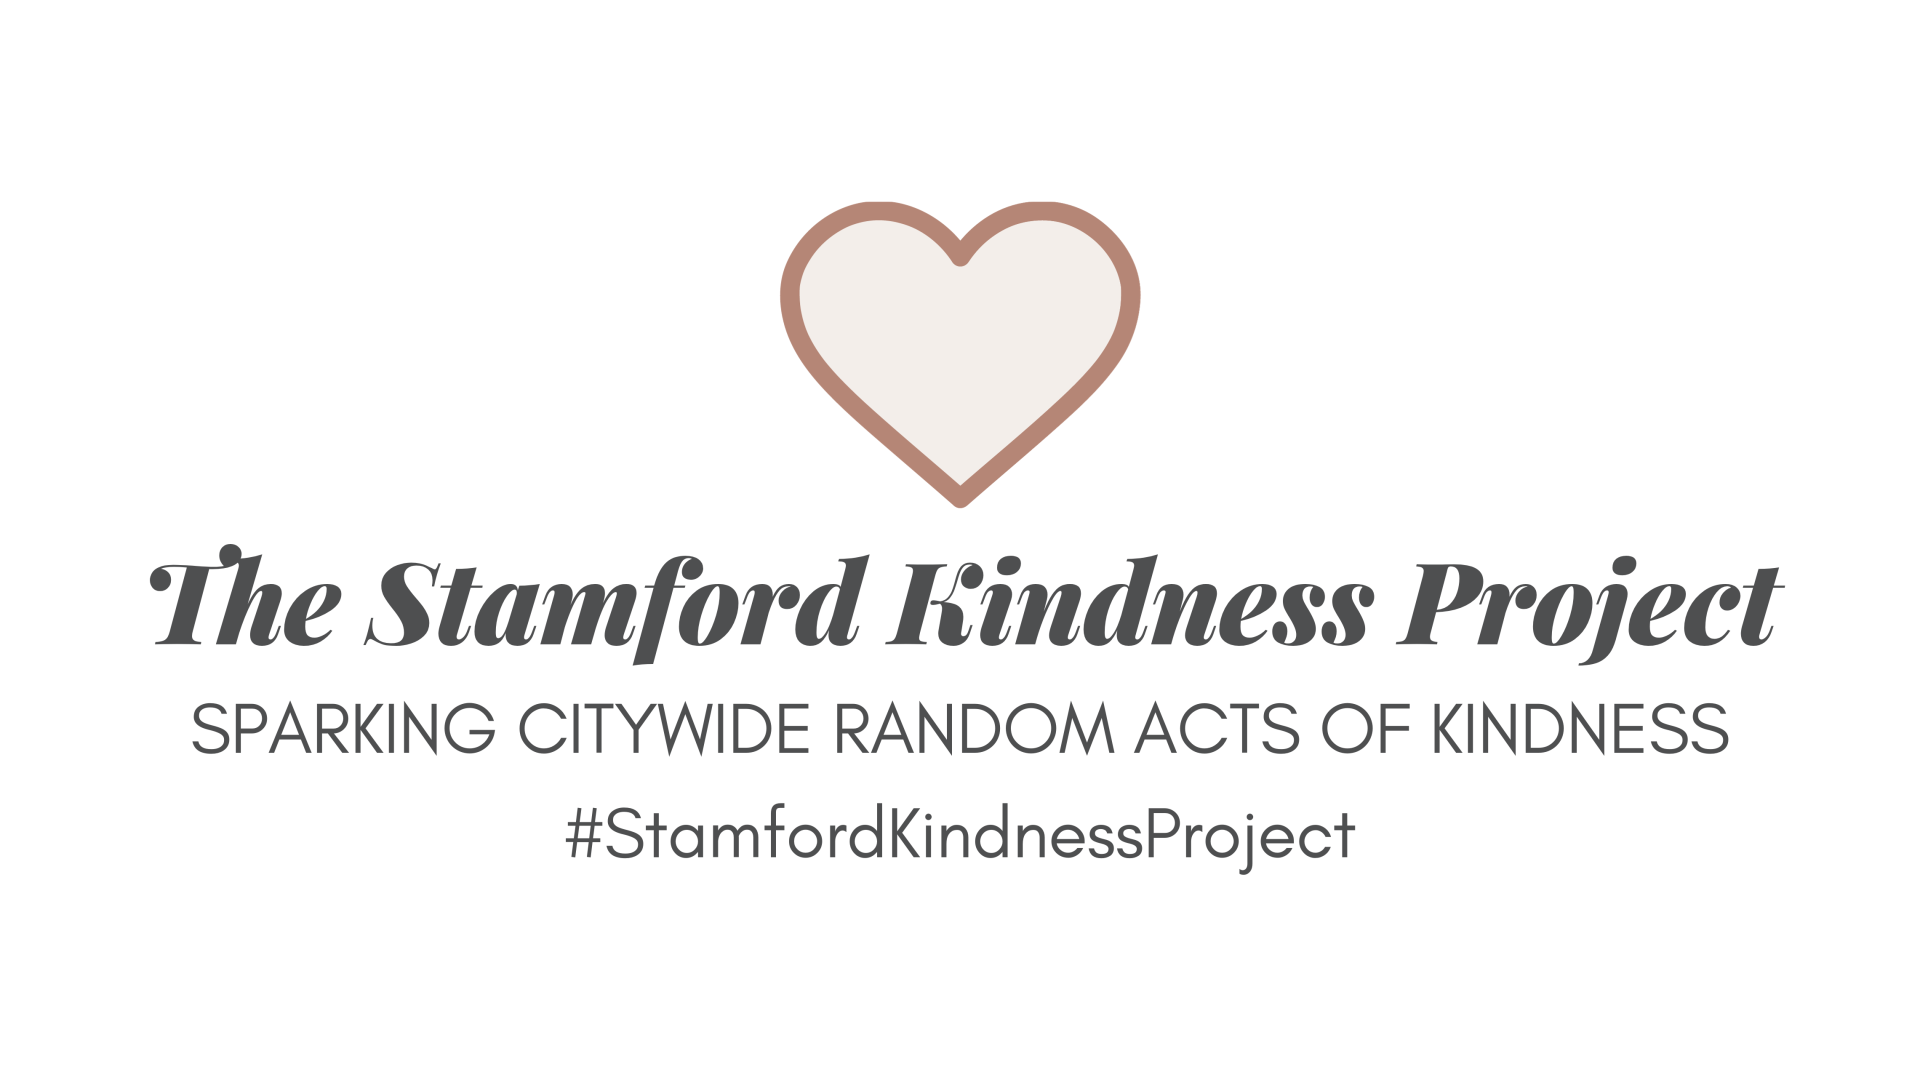 The logo of the Stamford Kindness Project on a white background